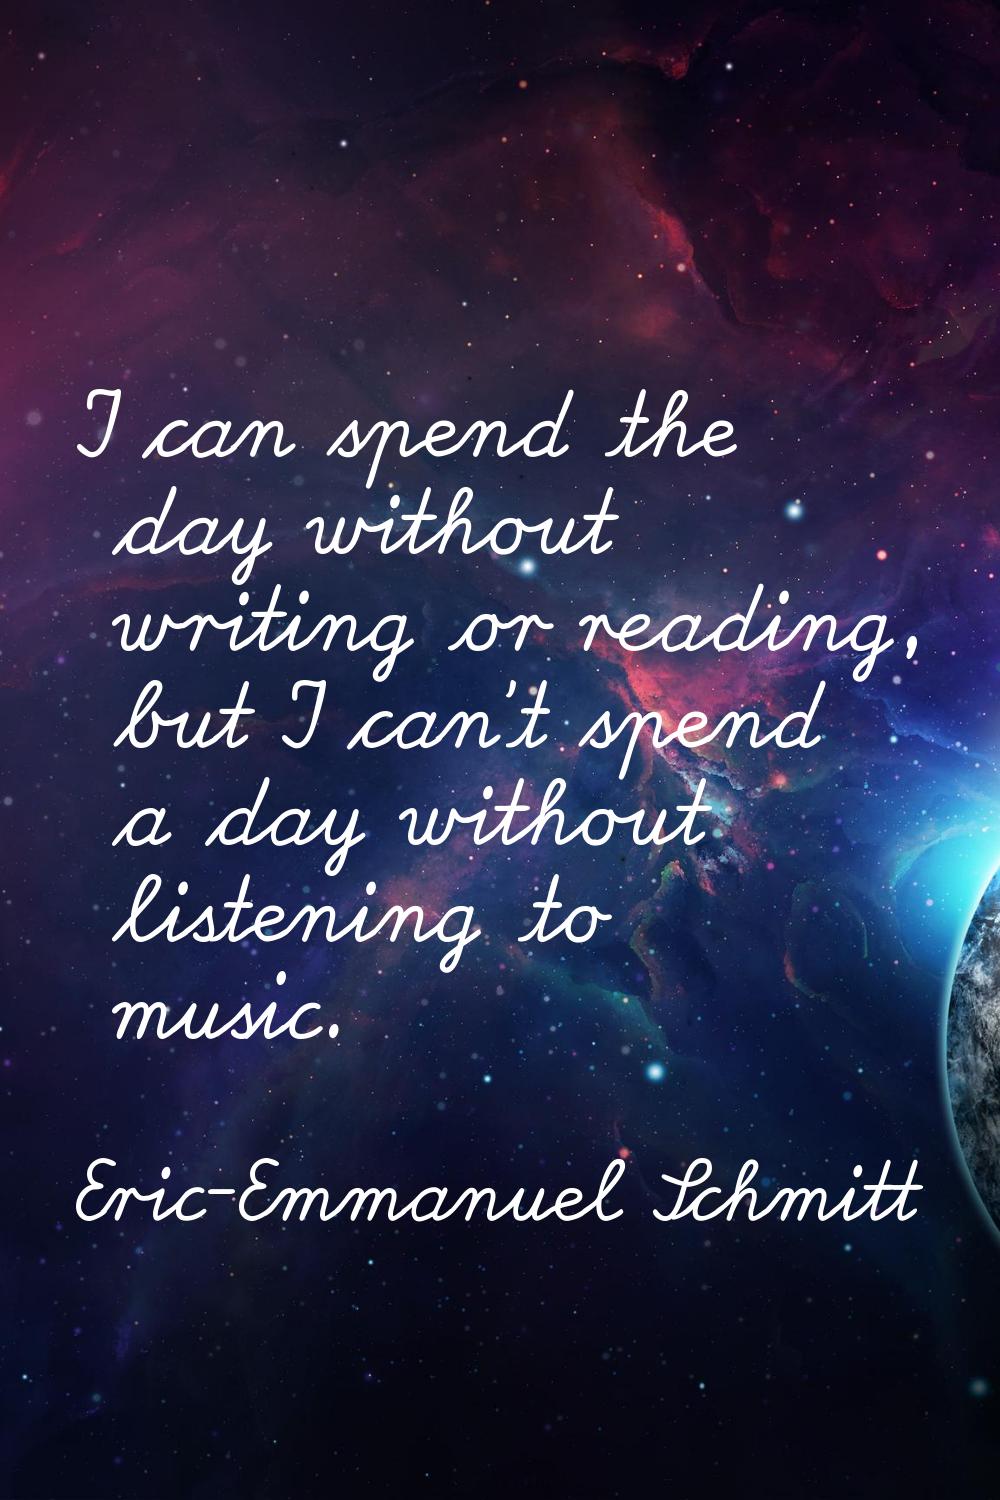 I can spend the day without writing or reading, but I can't spend a day without listening to music.